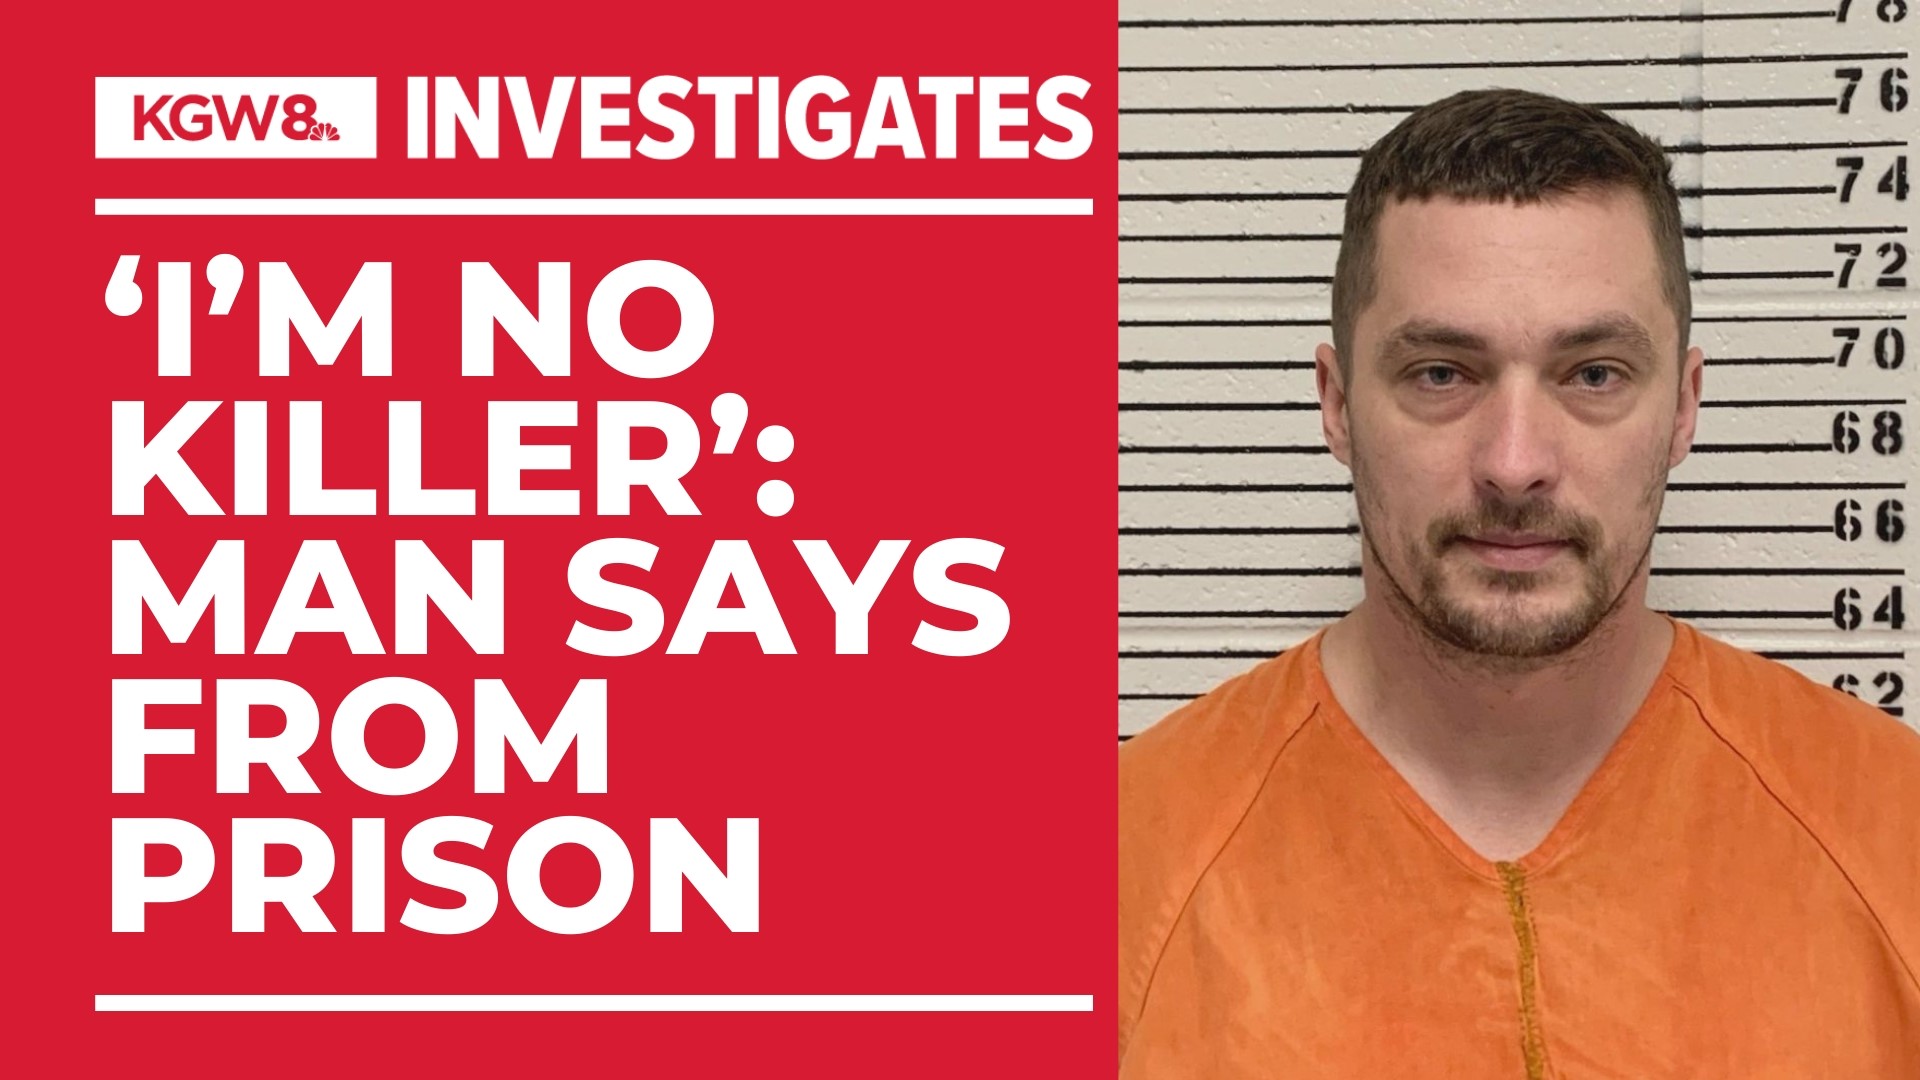 Over the past three months, Jesse Calhoun has exchanged messages with KGW using the inmate communication system. He claims he's been wrongly accused.